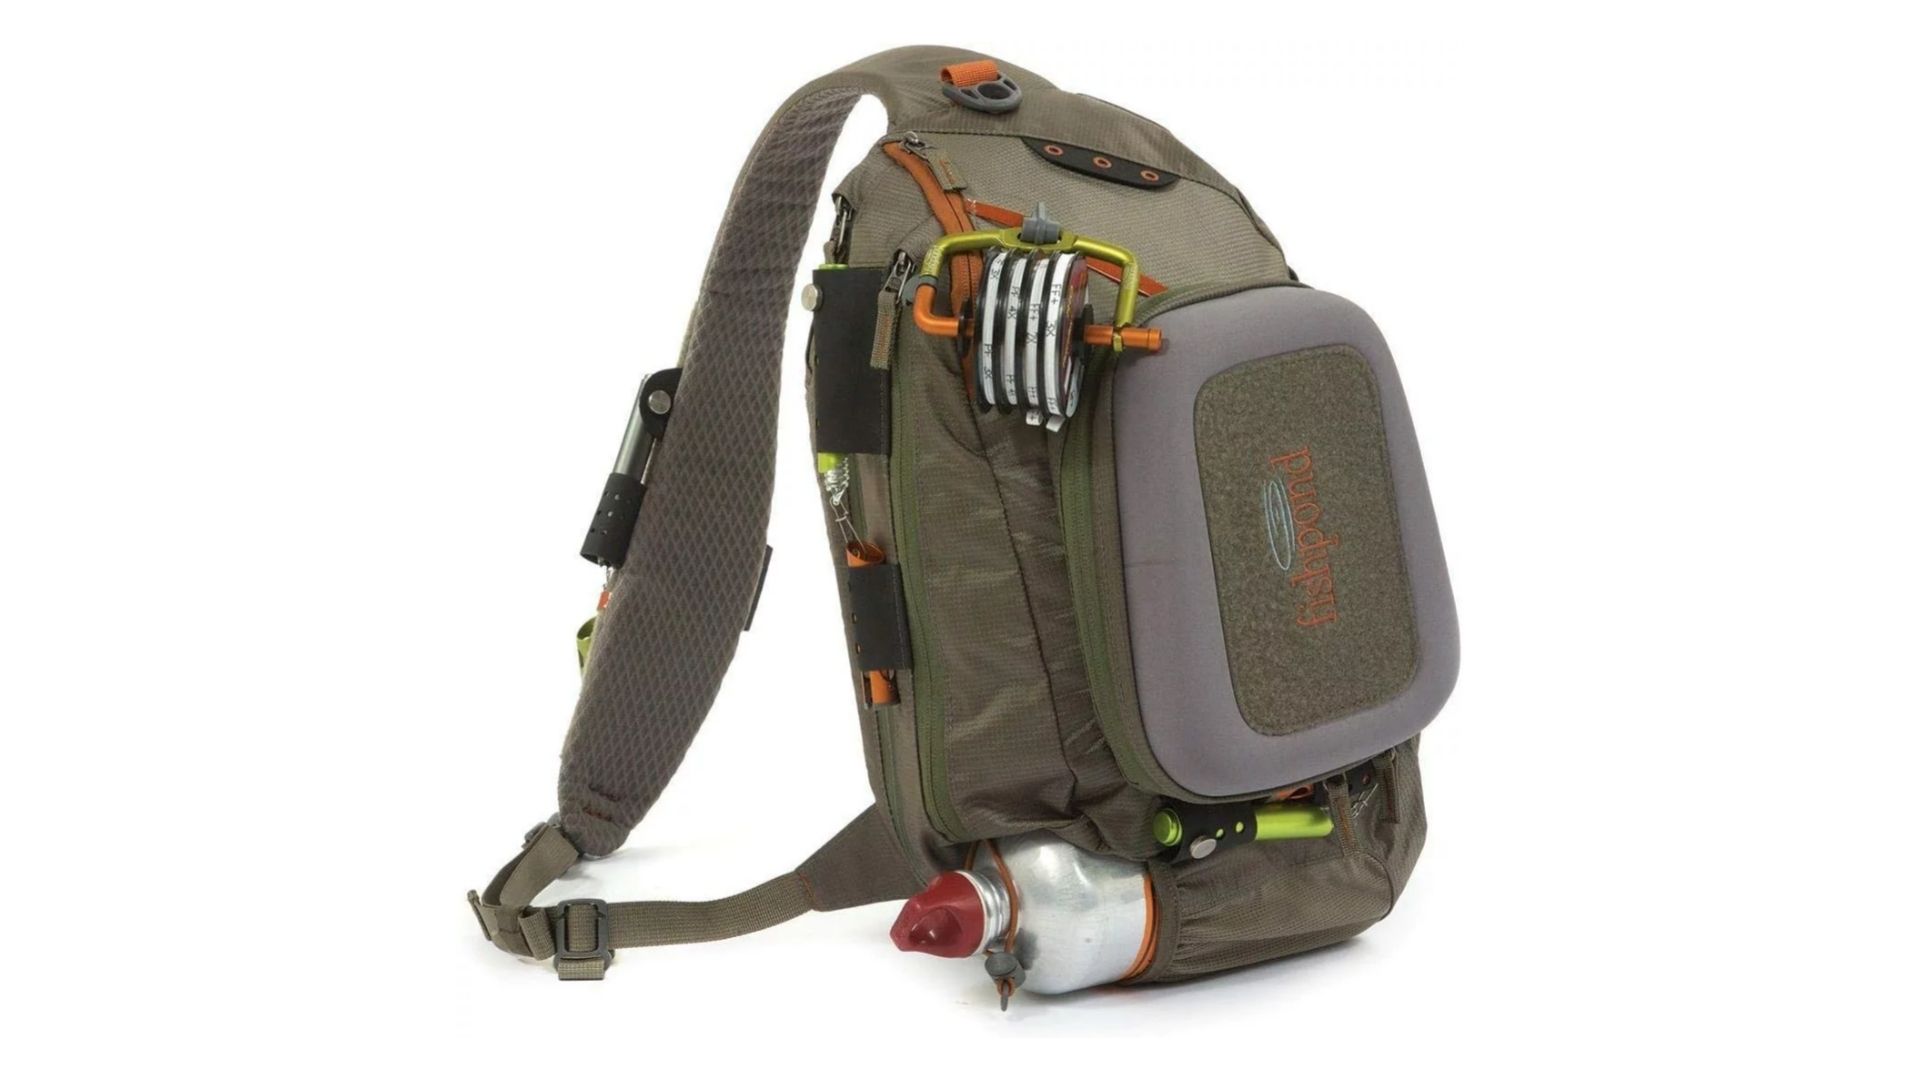 Bear Creek Micro Fly Fishing Chest Pack, Fits Up To 4 Tackle/fly